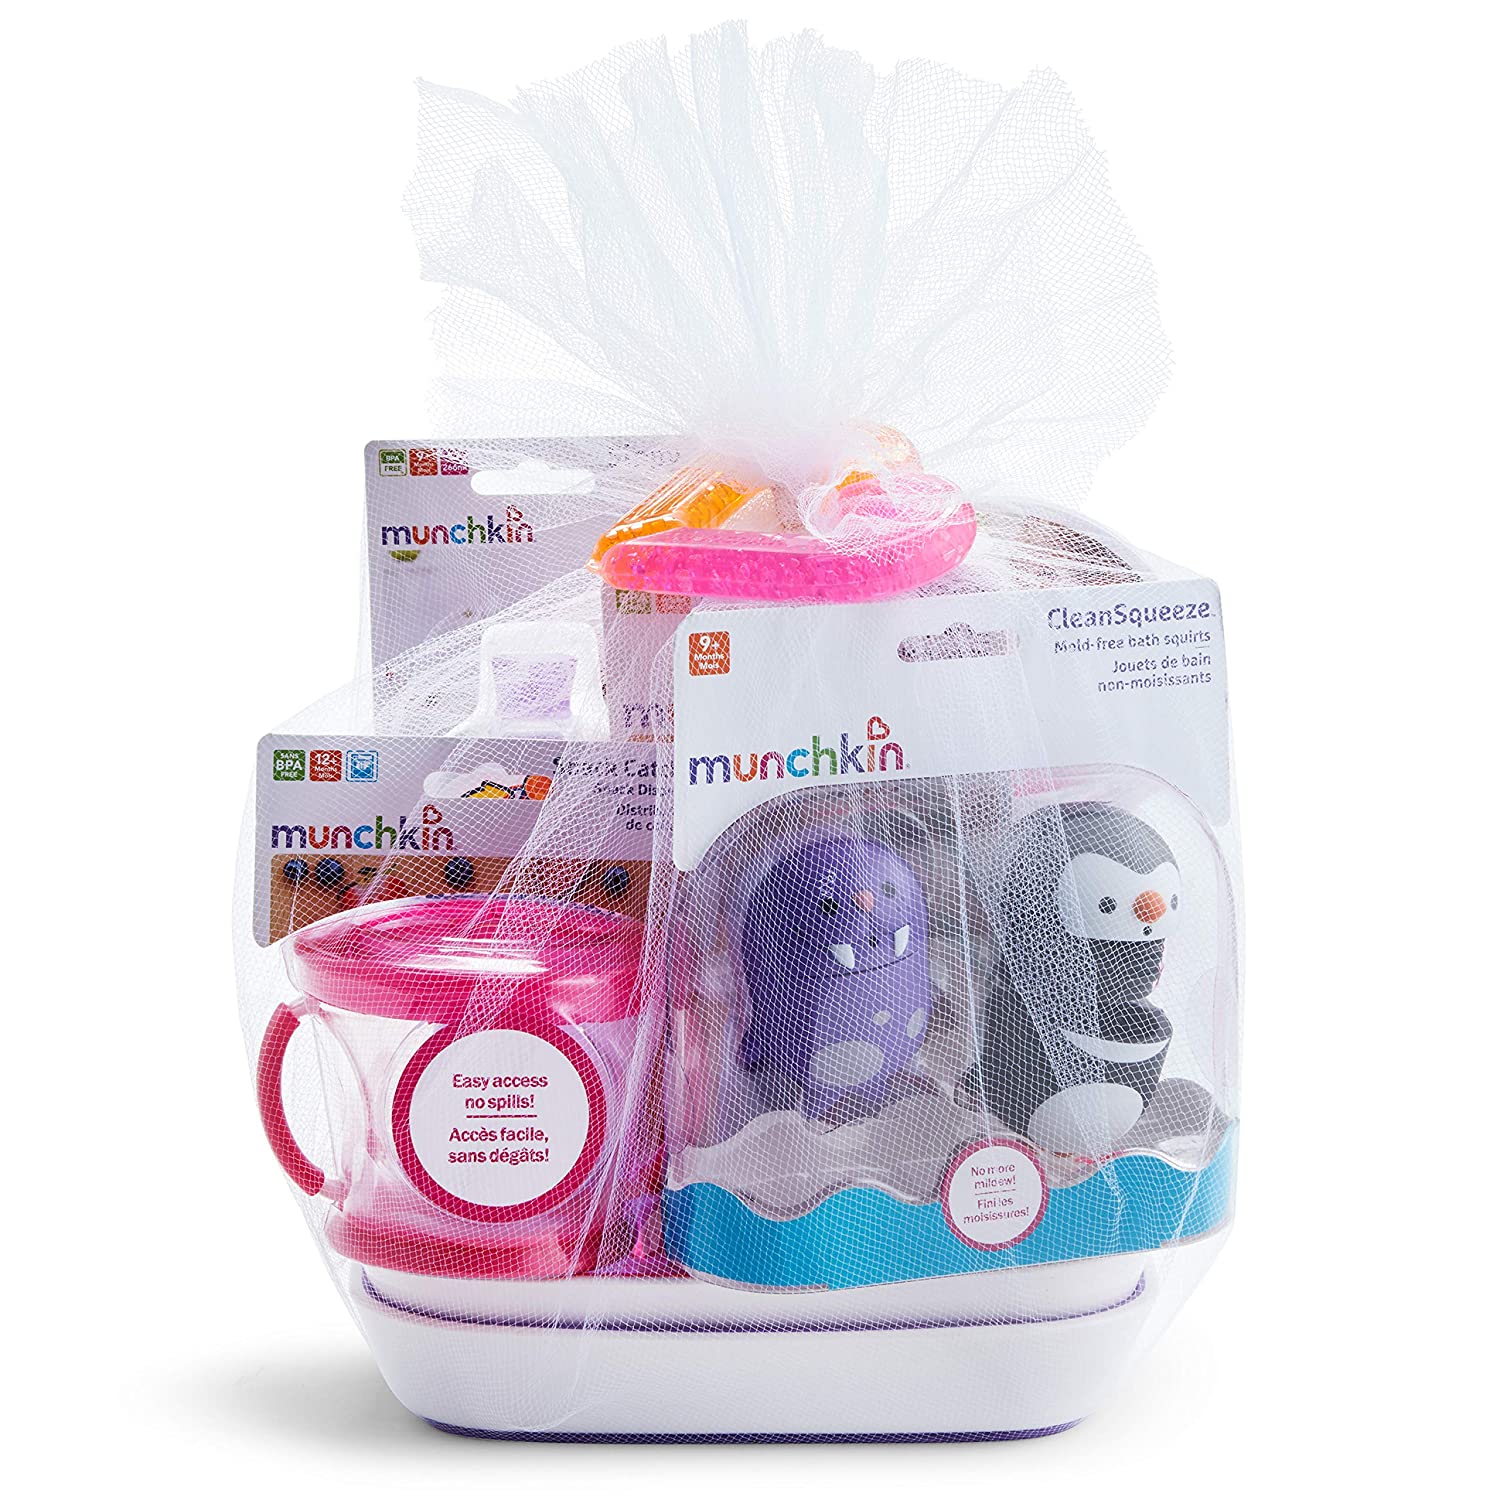 Munchkin 1st Birthday Gift Basket, Includes Sippy Cups, Plates, Feeding Utensils, Snack Catcher, Bath Toy and Teether, Pink